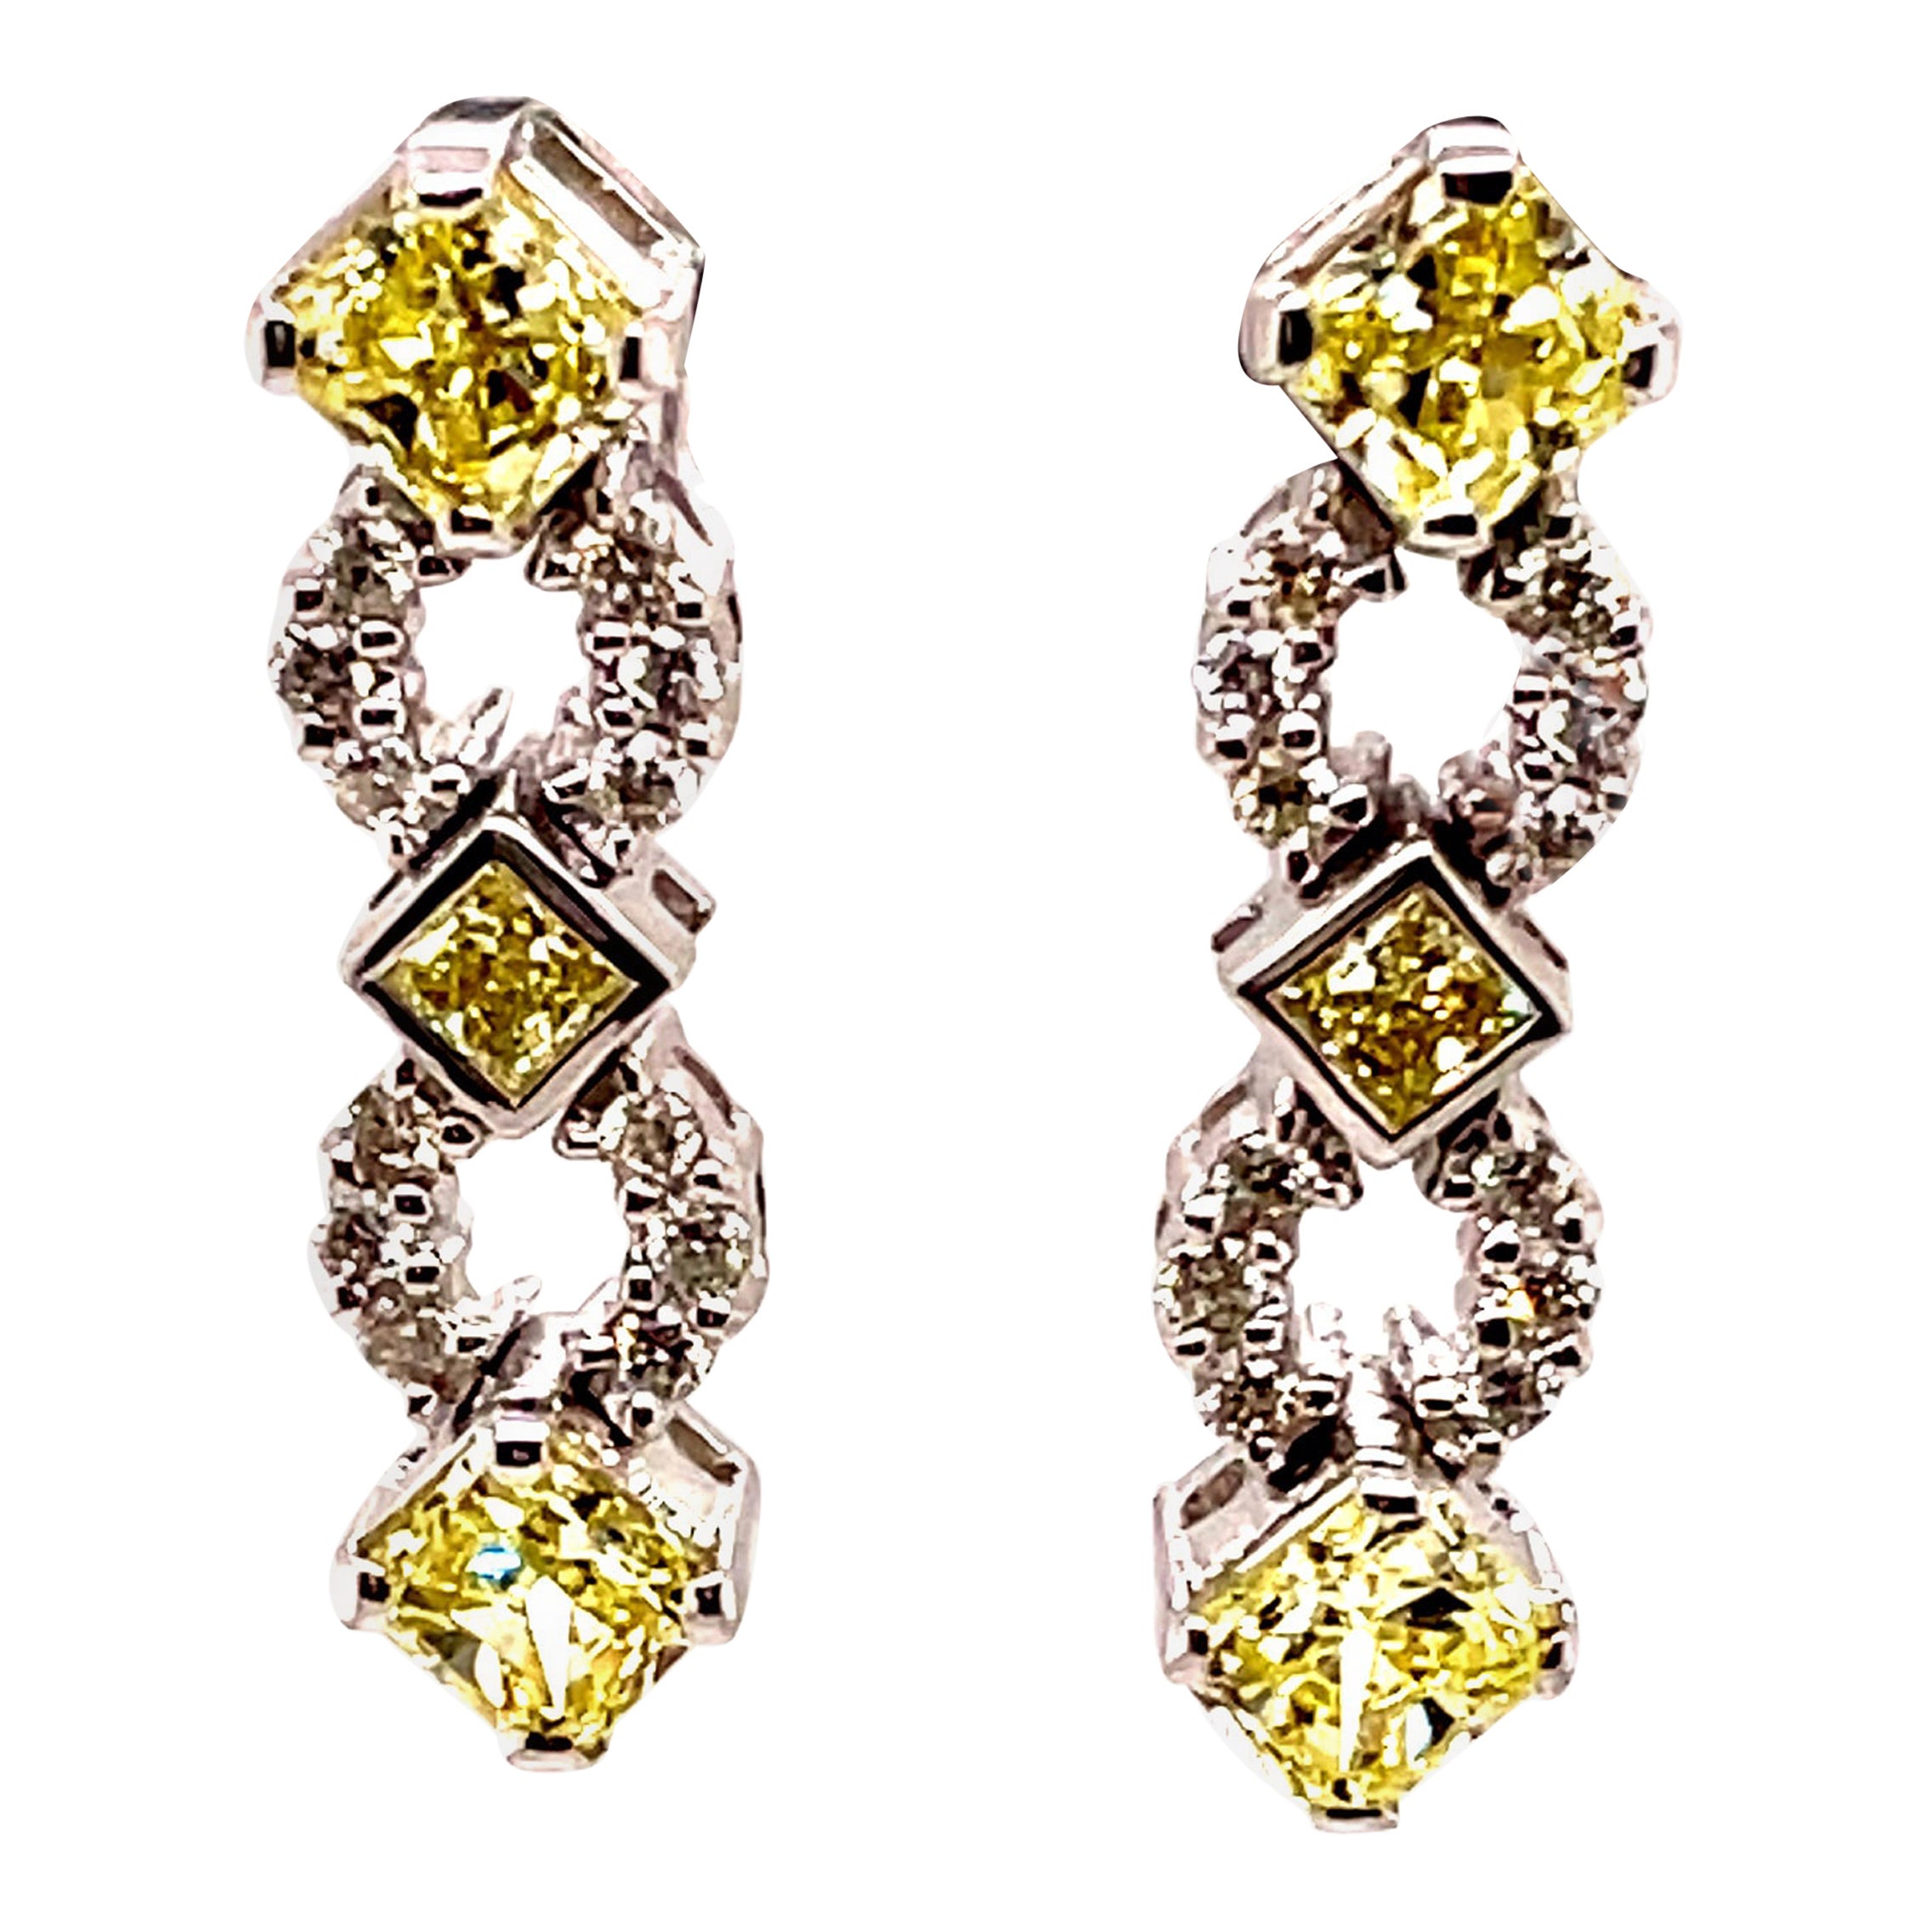 2.25ct Yellow Diamond Earrings 18k White Gold For Sale